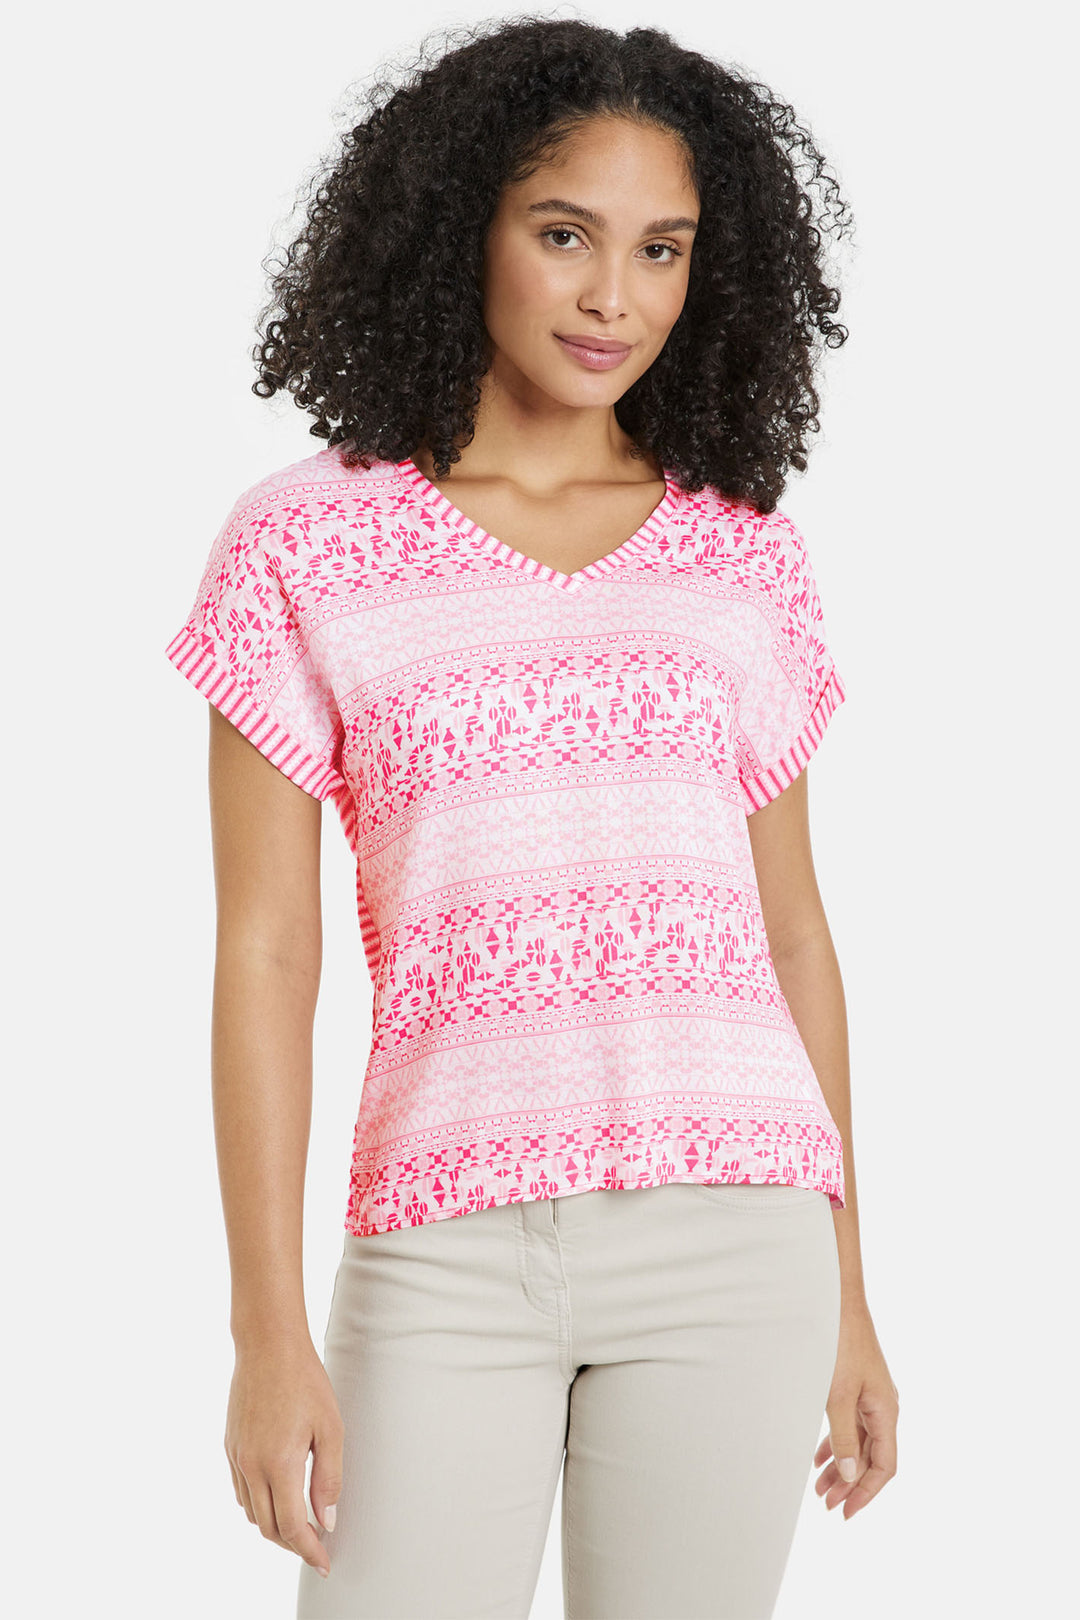 Gerry Weber 270081 Pink Diamond Print V-Neck Top - Experience Boutique